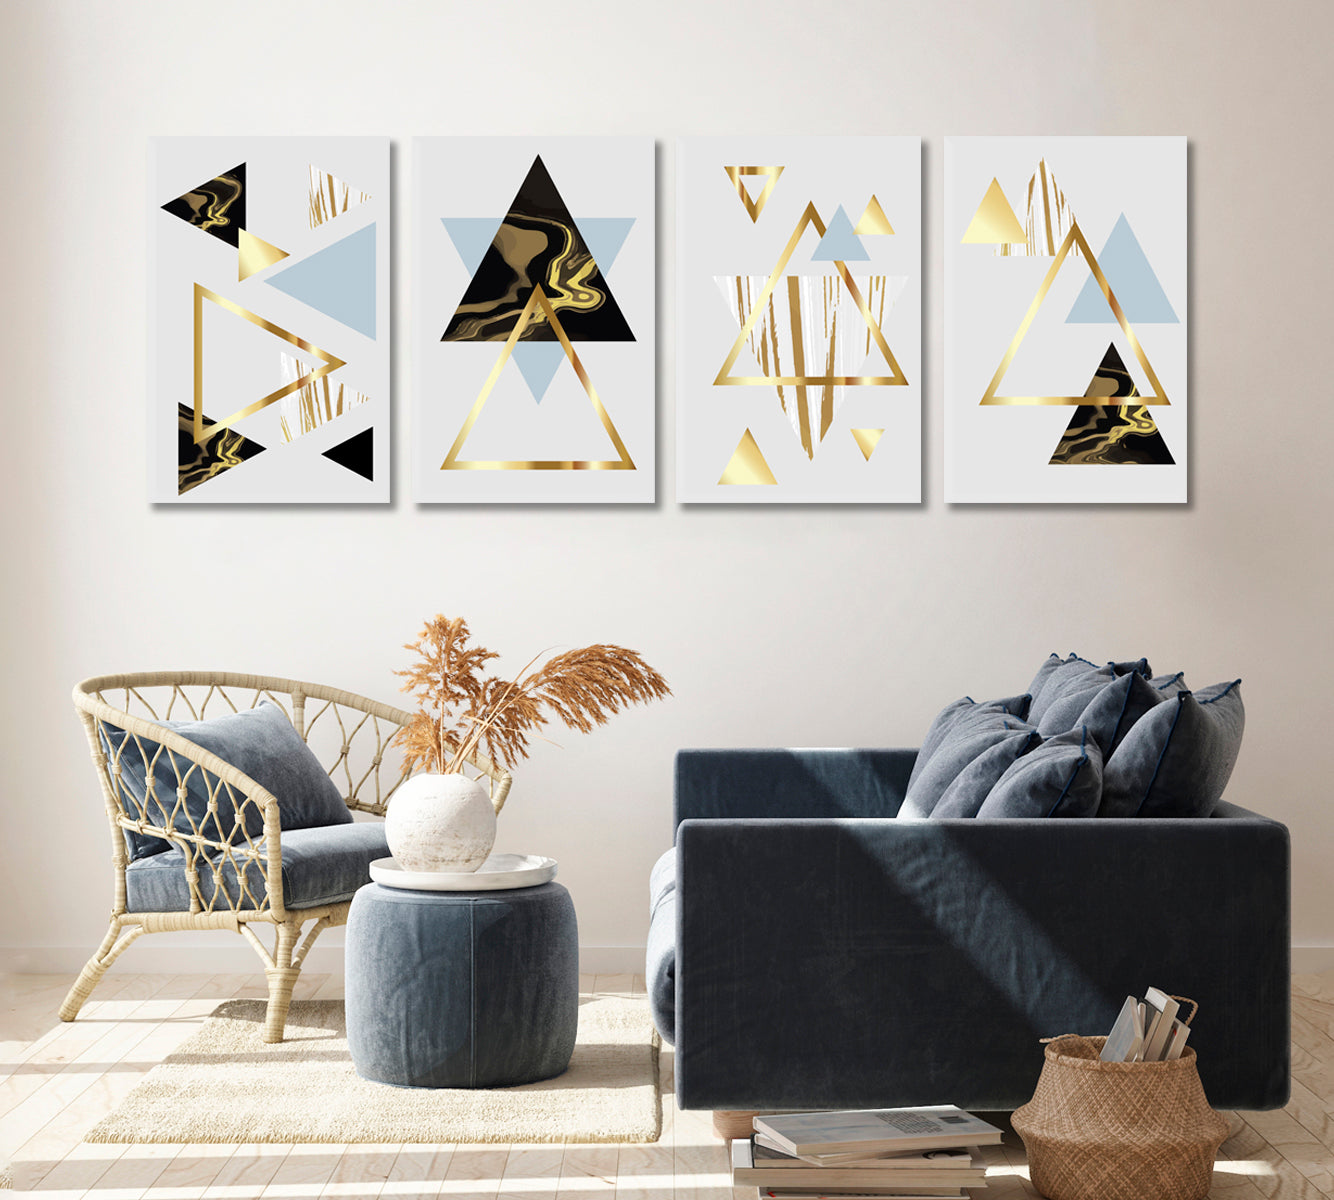 Set of 4 Vertical Abstract Geometric Marbling Triangles Canvas Print ArtLexy 4 Panels 64”x24” inches 